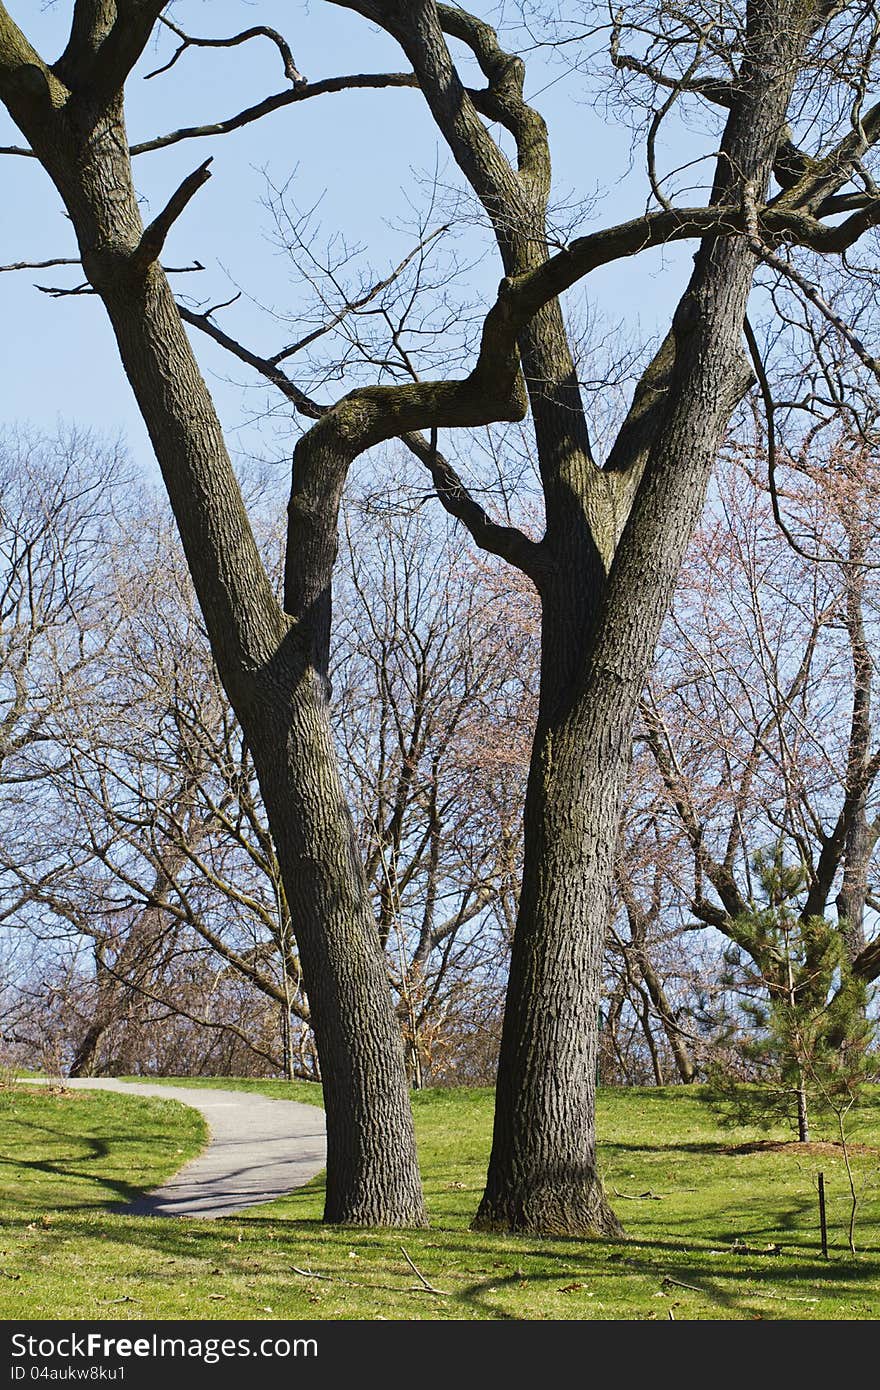 Two towering black oak trees beside paved path in early spring. Small black oak sapling nearby is tied to a protective stake. Urban park setting, no people. Vertical composition. Two towering black oak trees beside paved path in early spring. Small black oak sapling nearby is tied to a protective stake. Urban park setting, no people. Vertical composition.